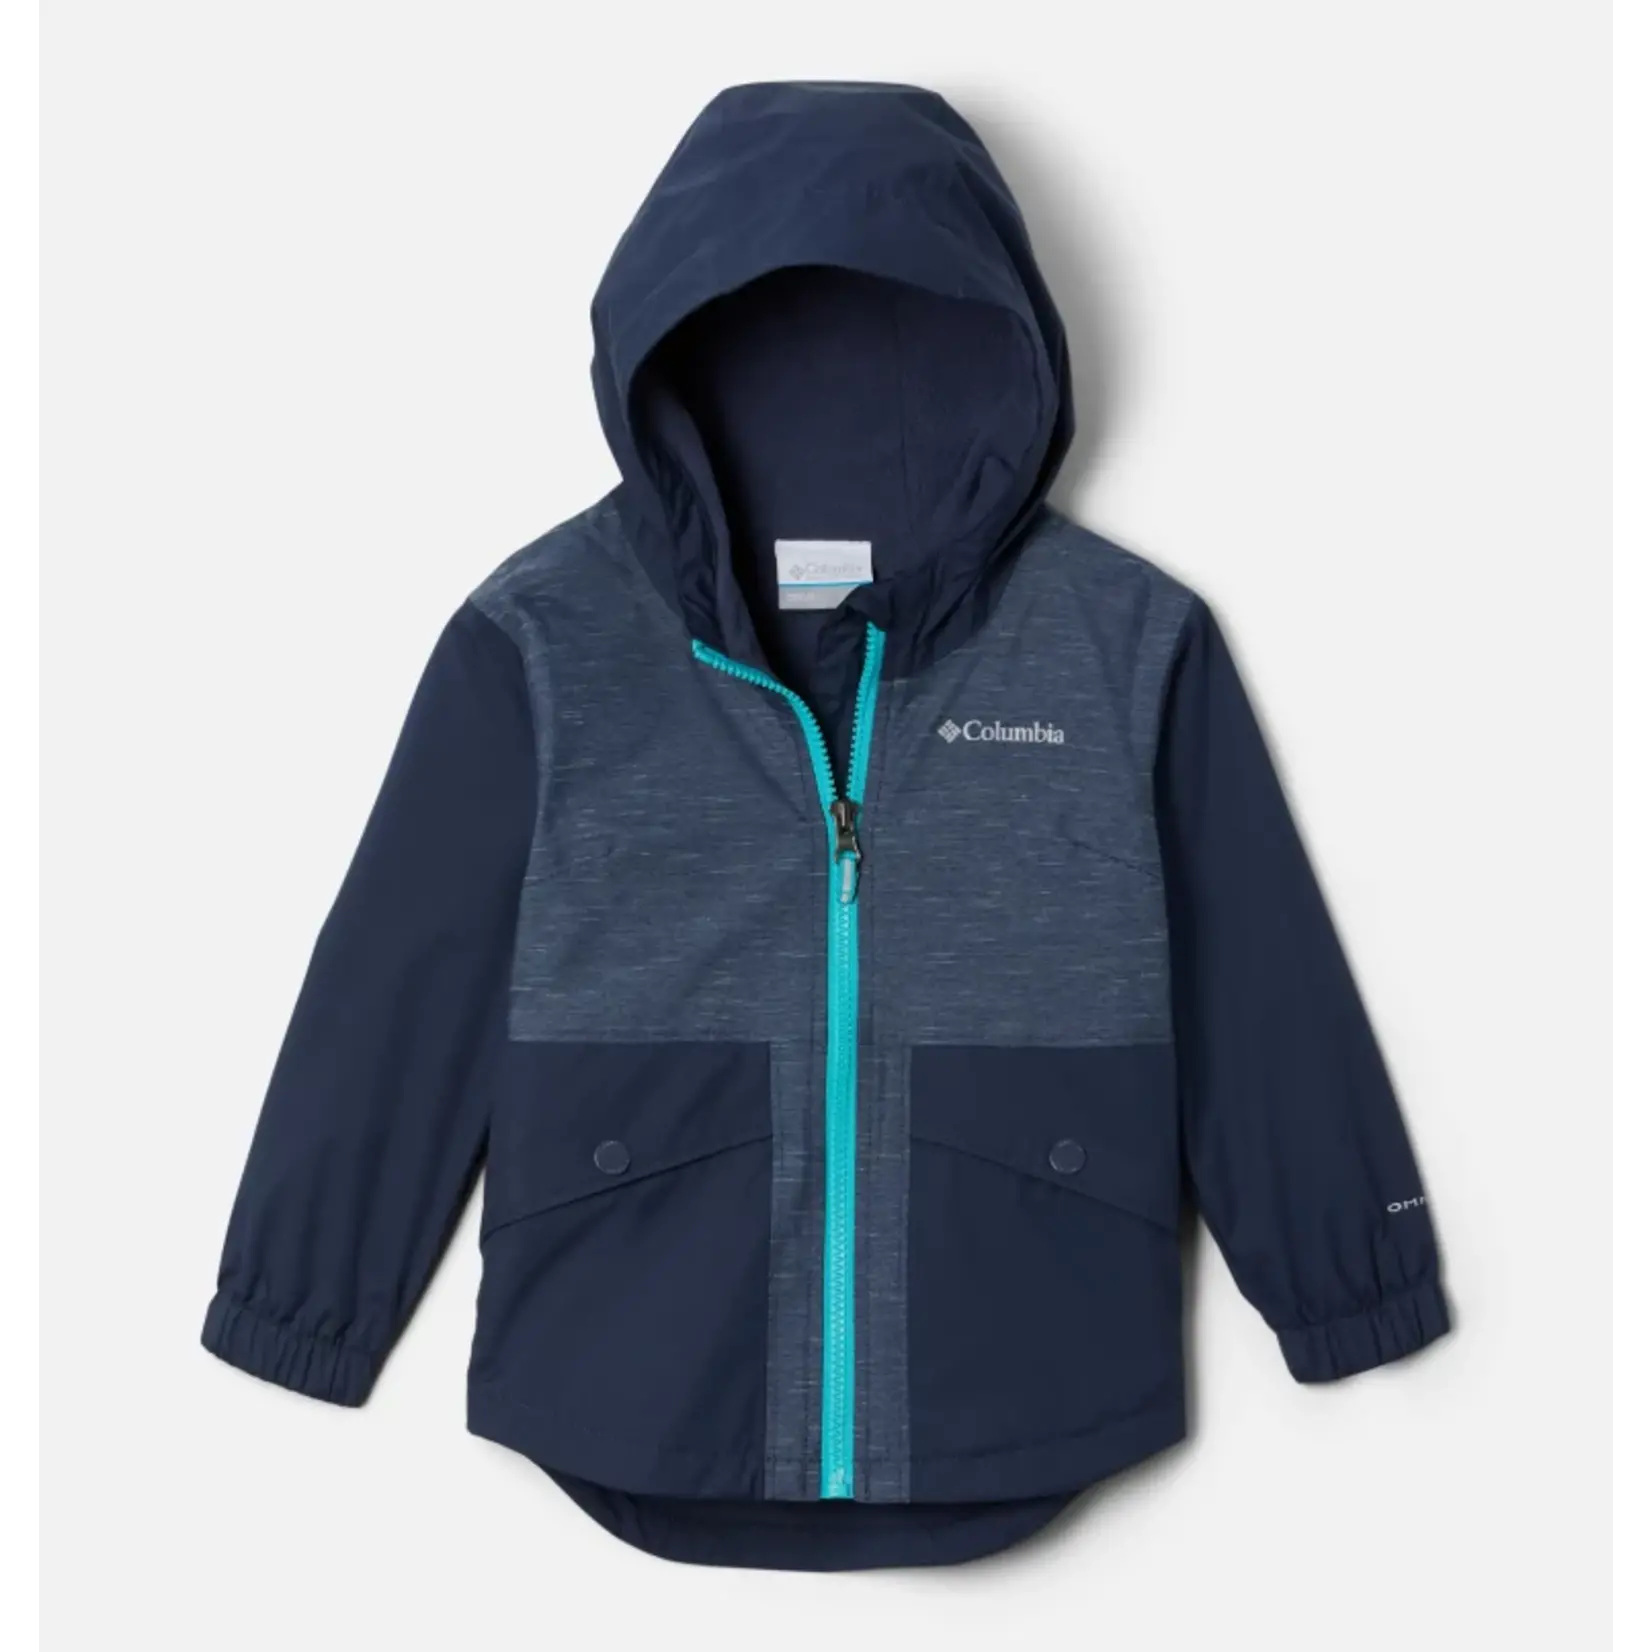 Columbia Rainy Trails Fleece Lined Jacket - Nocturnal